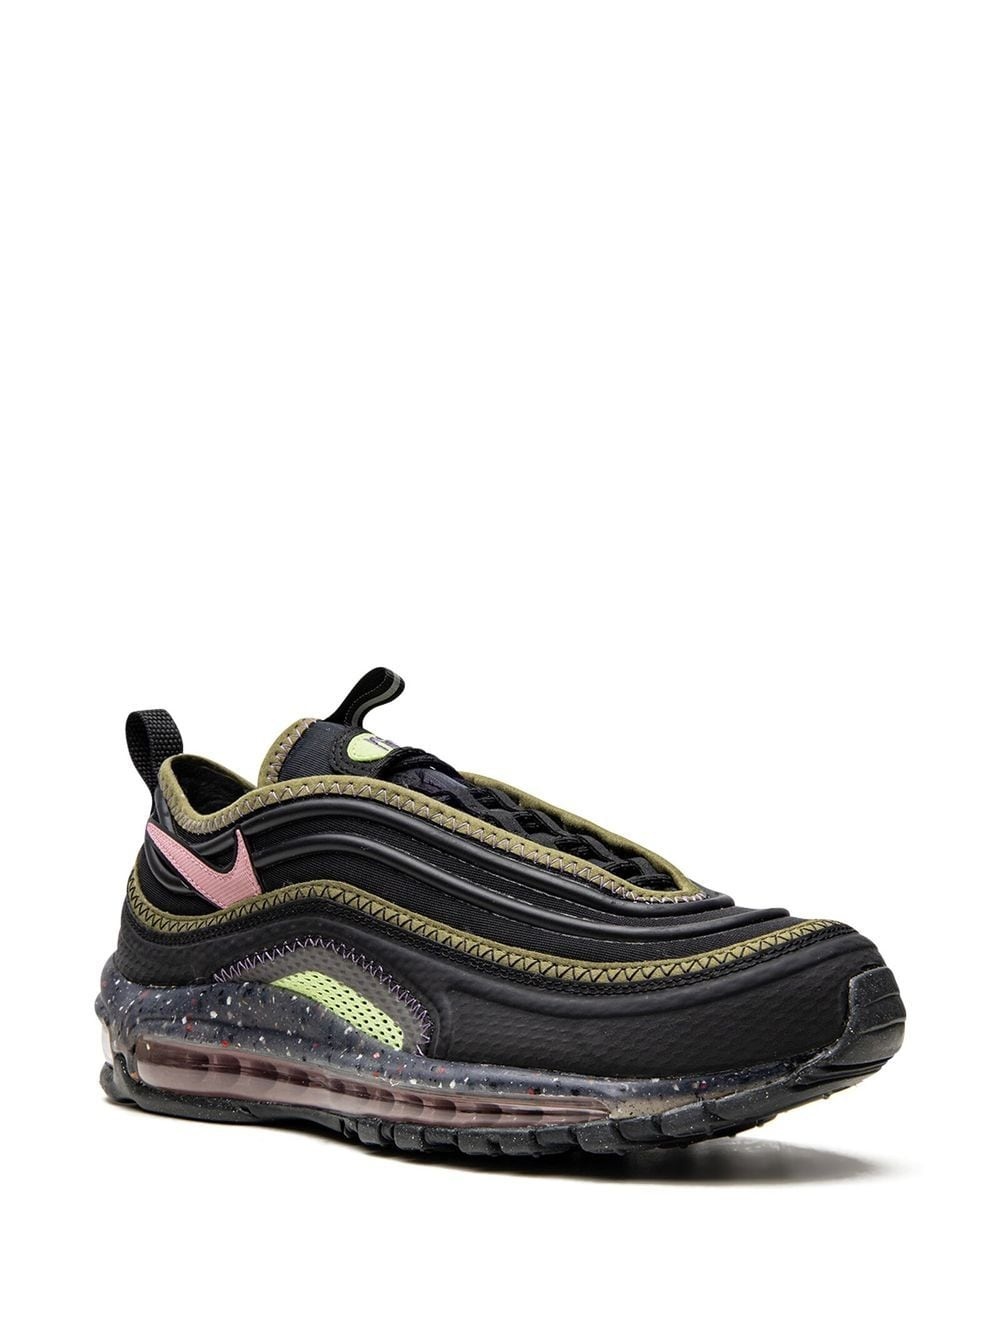 Air Max 97 "Terrascape" sneakers - 2